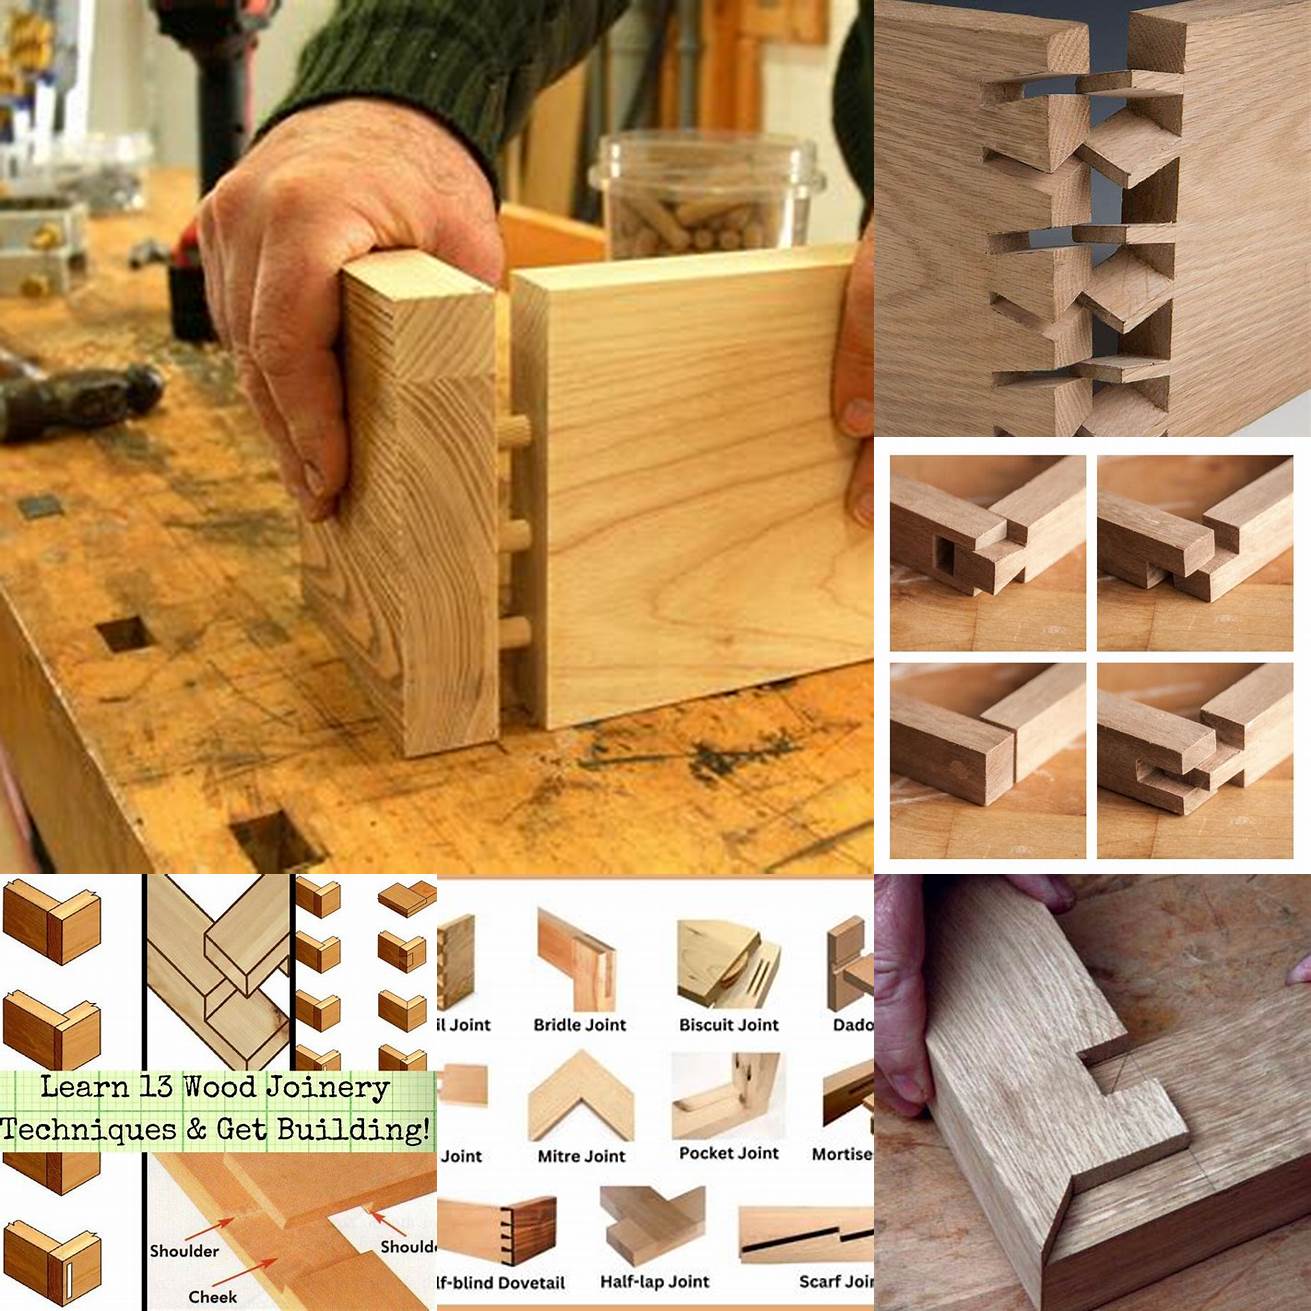 Joinery techniques